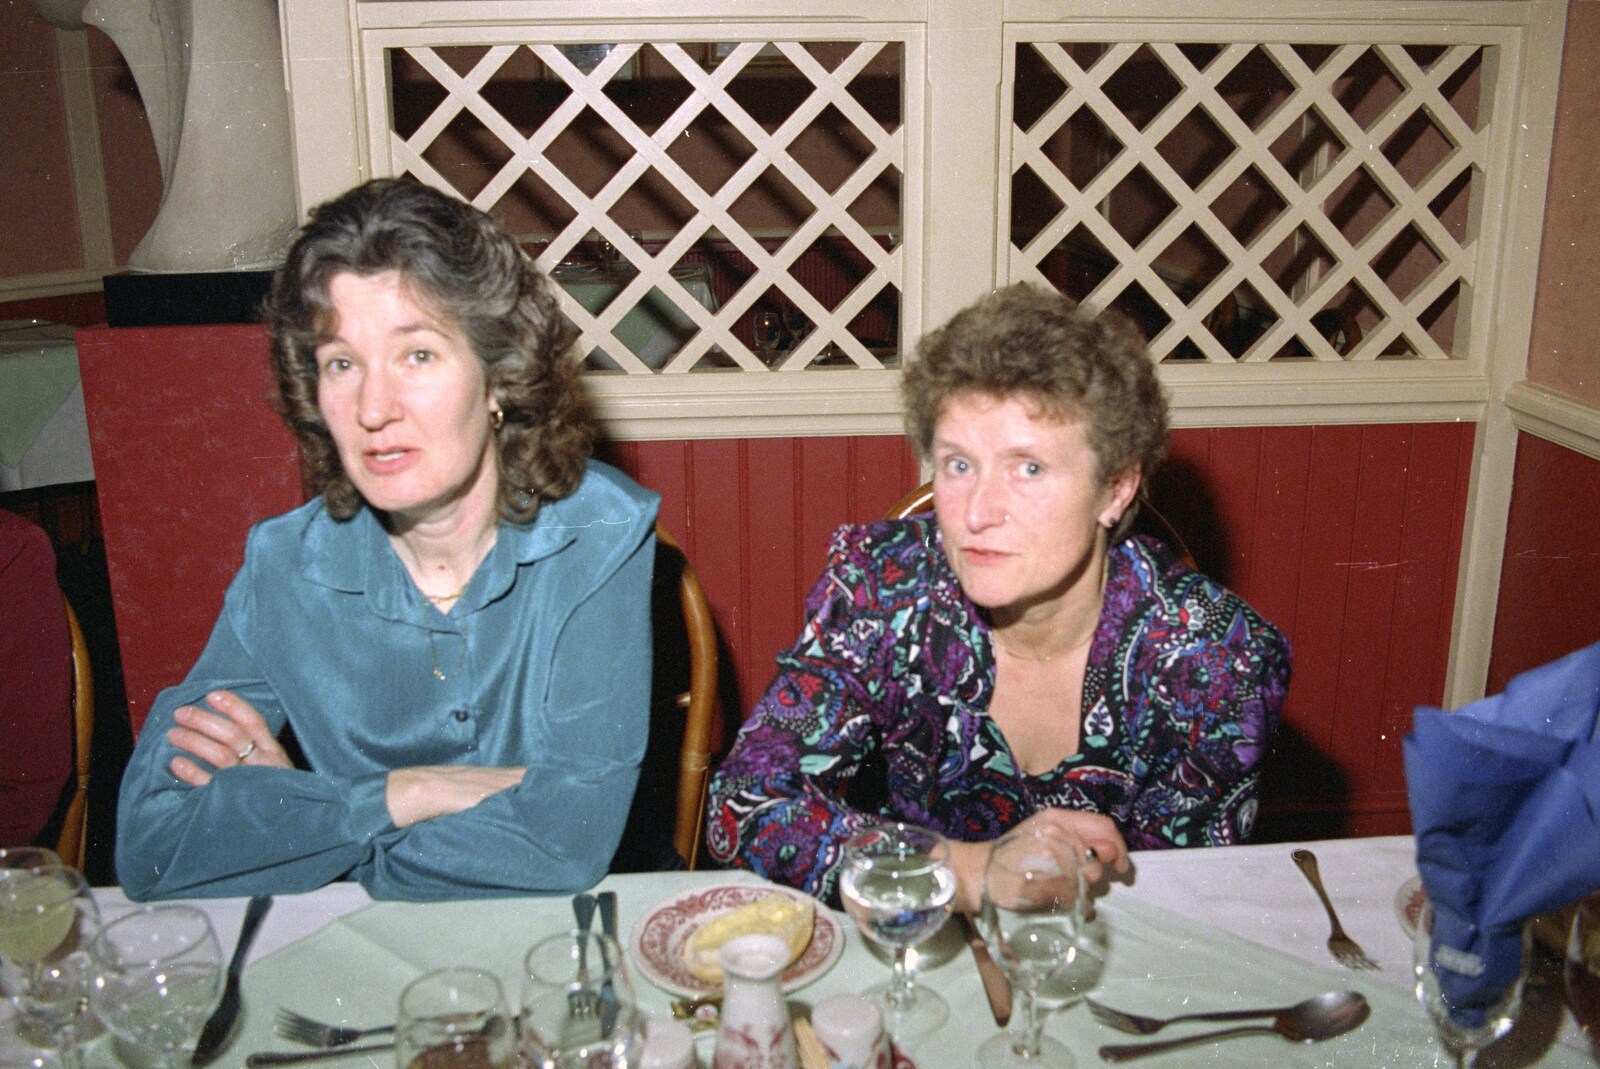 Brenda and Wendy from Printec at the Park Hotel, Diss, Norfolk - 14th January 1992